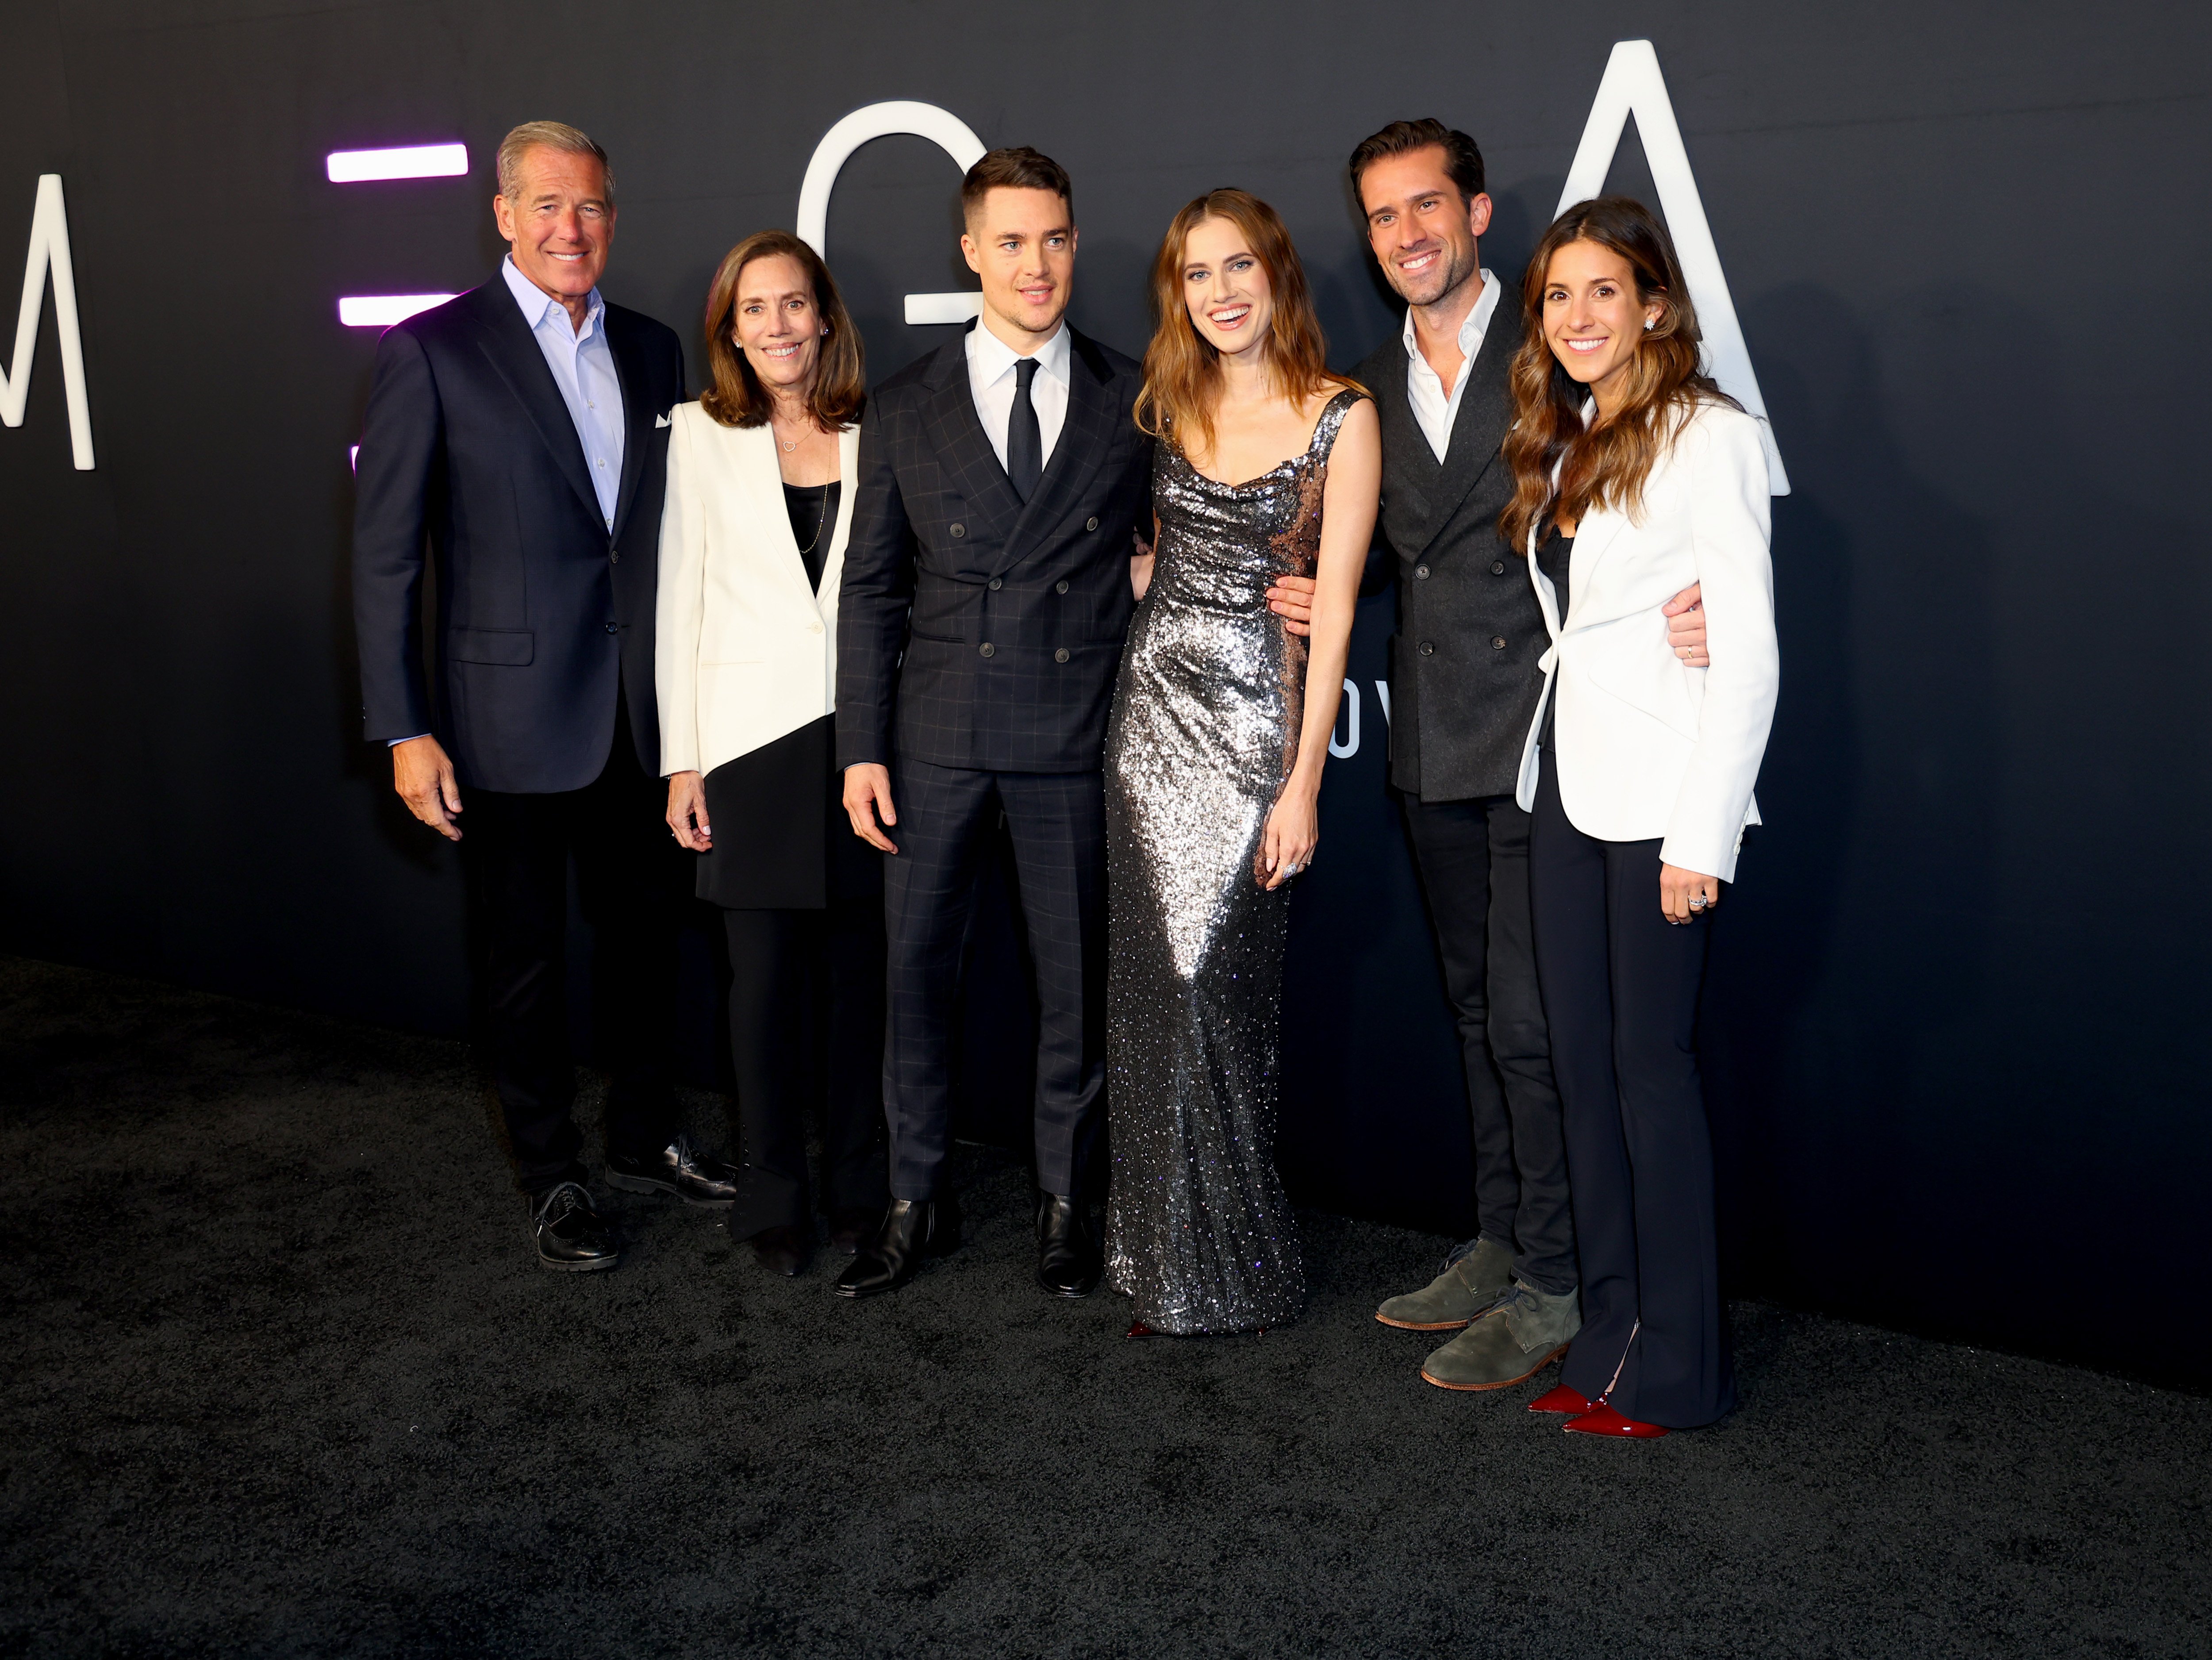 Brian Williams, Jane Stoddard Williams, Alexander Dreymon, Allison Williams, Douglas Williams, and Emily Altieri attend the Los Angeles Premiere Of Universal Pictures' "M3GAN" at TCL Chinese Theatre on December 7, 2022, in Hollywood, California. | Source: Getty Images